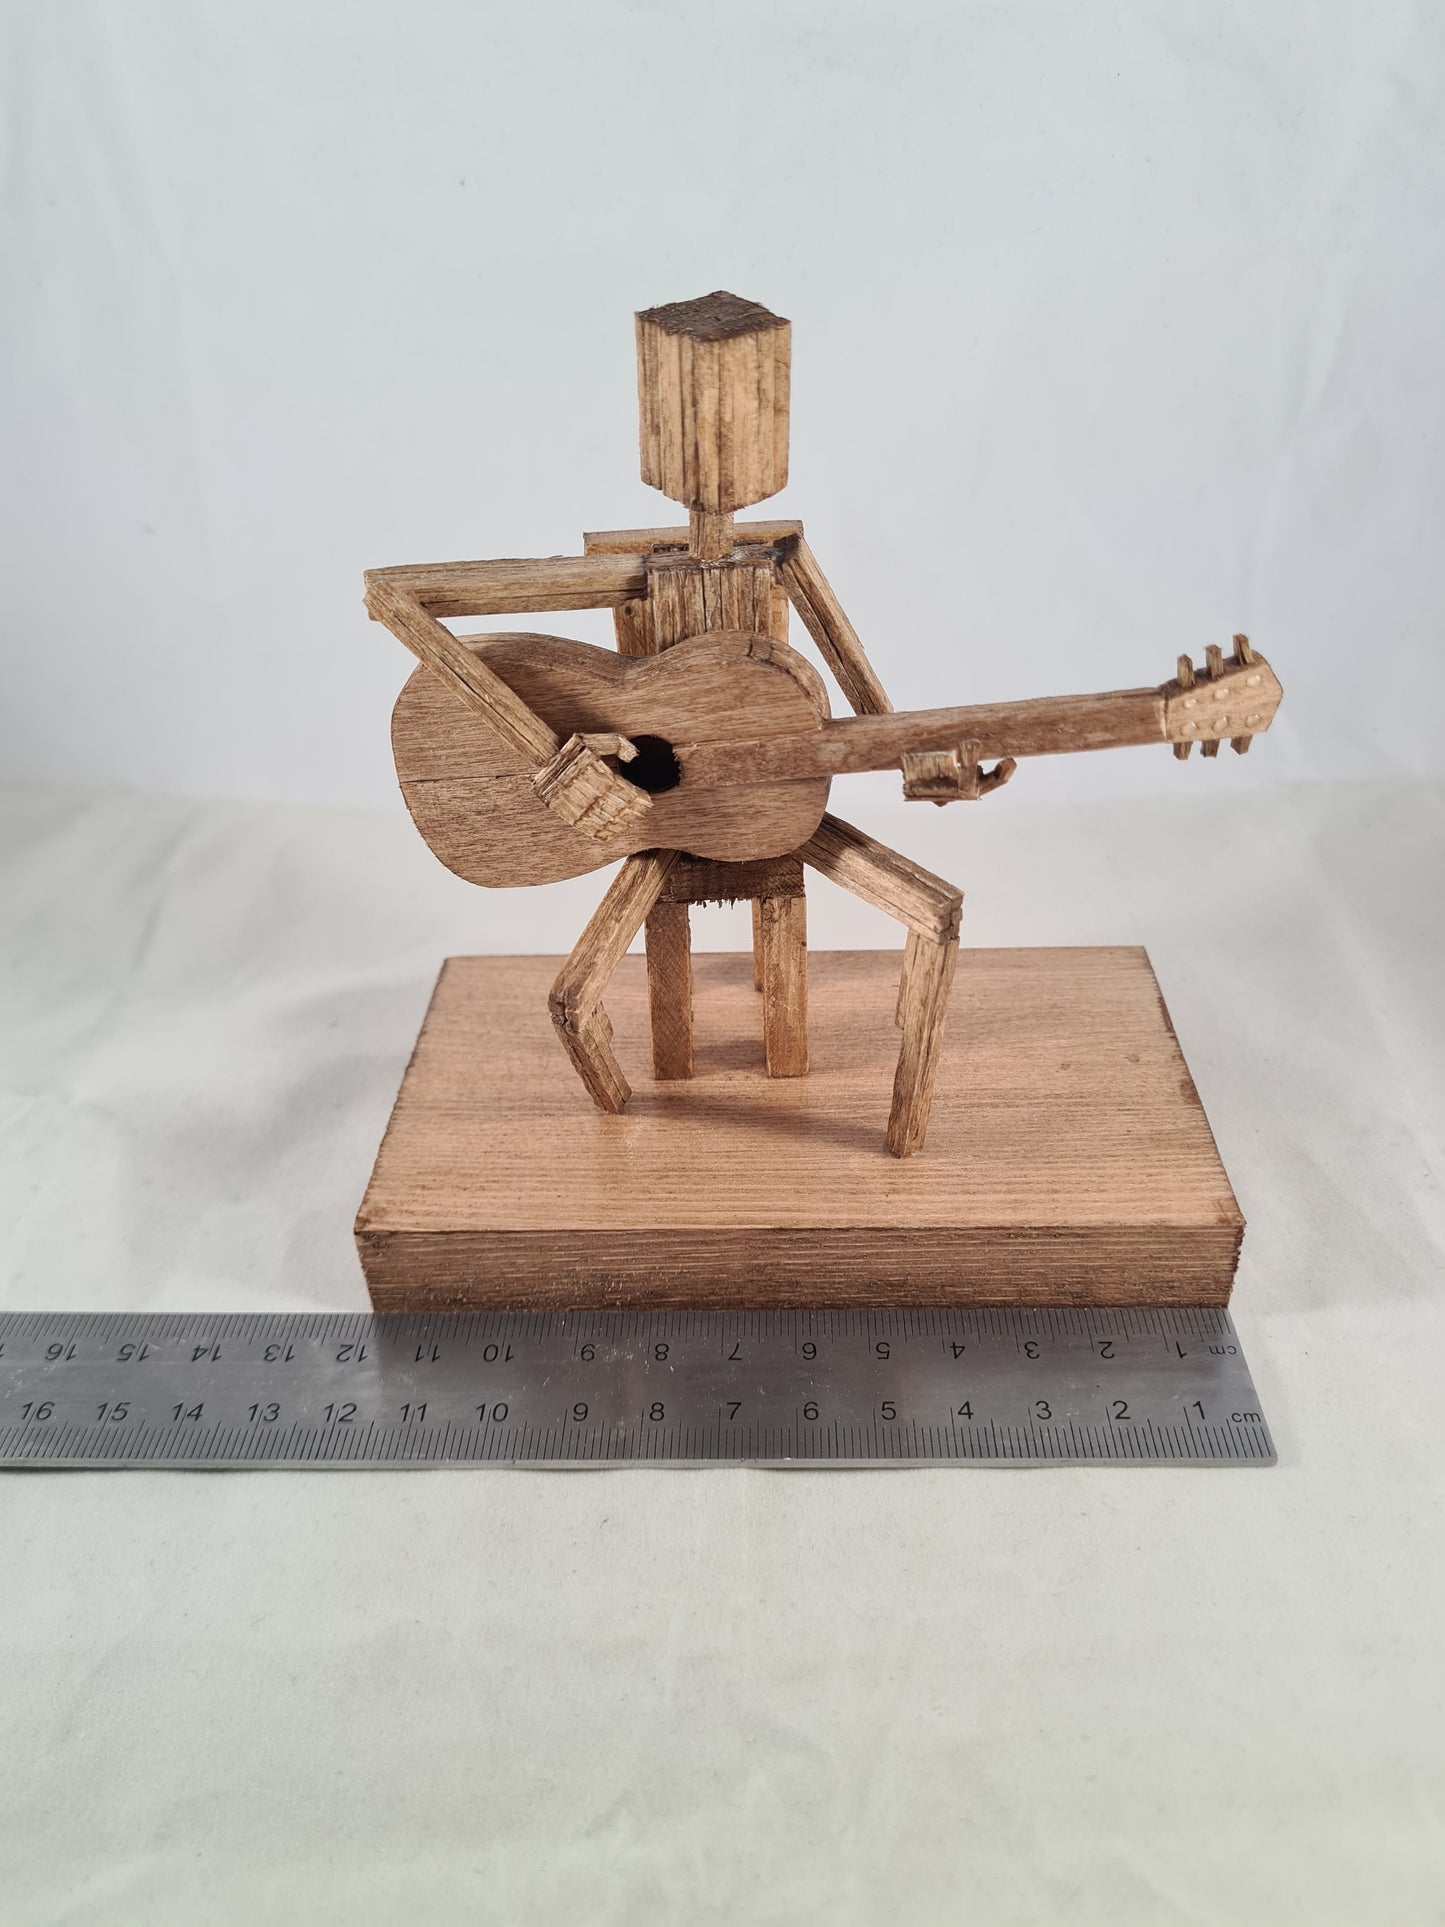 Another Acoustic Guitar Jam Session - Handcrafted Wooden Matchstick Figures - Gifts, Ornaments and Decor By Tiggidy Designs